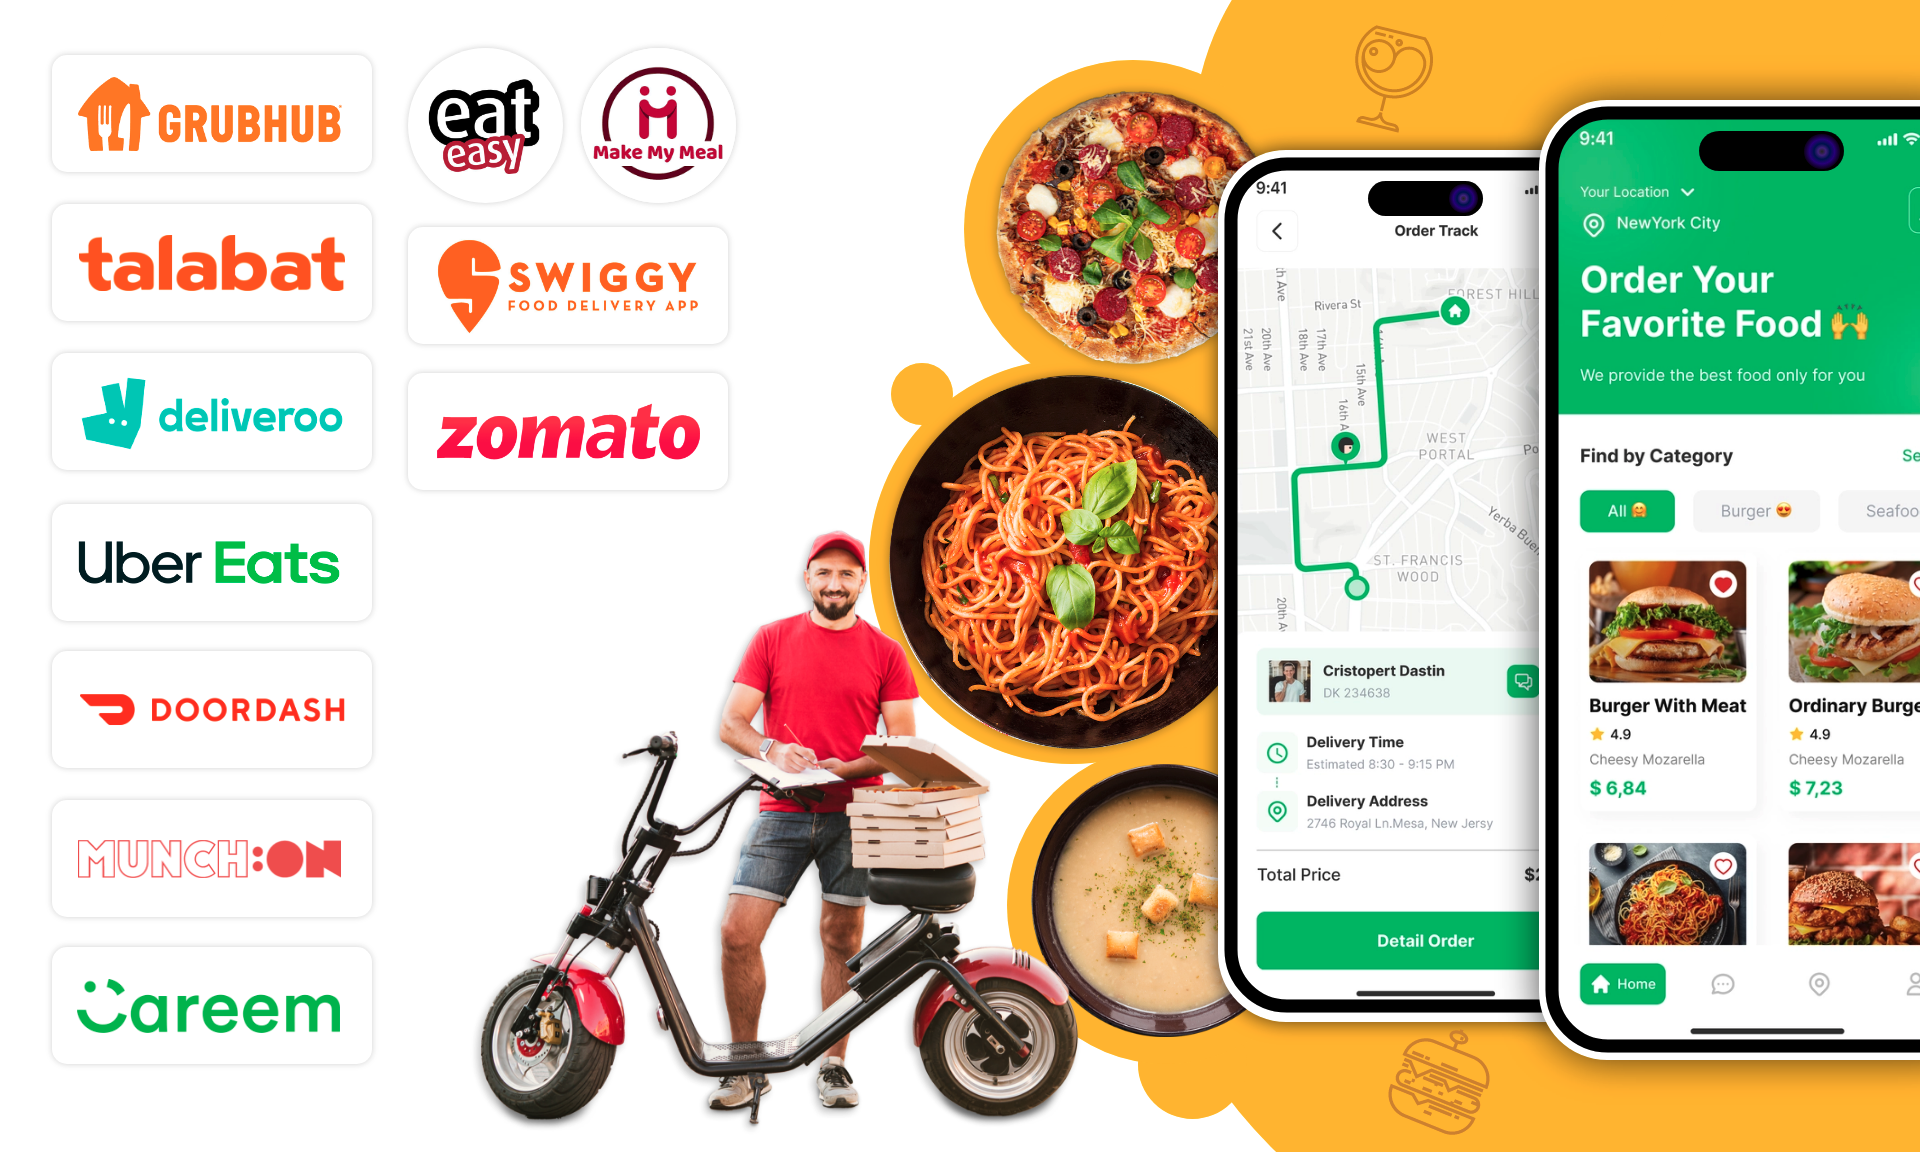 {1 crusHuB

talabat
d deliveroo

Uber Eats

SD DOORDASH

wareem

Ef] Ha

XD) Make My Meal

  
    
  
  

9:41

(CTI

®@ LTC Ye
He i #
Gsvicoy Ns aed) Order Your
\ h SE | Favorite Food ¢+4

We provide the best food only for you

zomato

Find by Category

@o

Delivery Time
©

      
     
 
     

Burger With Meat Ordinary Burge
49 a9

® Delivery Adcress $684 $723

si

LC a

   

Total Price